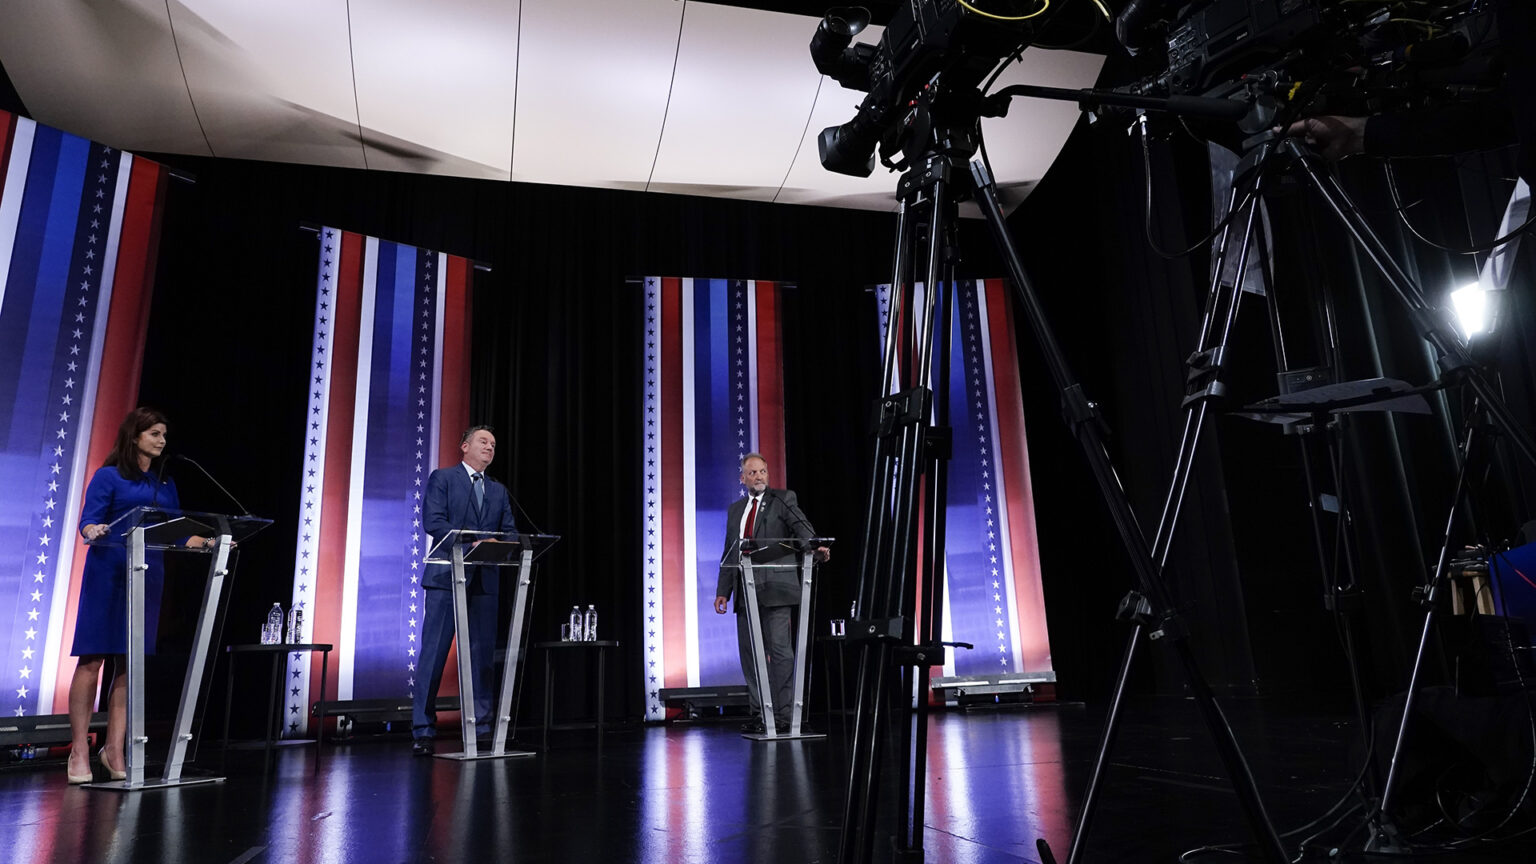 Rebecca Kleefisch, Tim Michels and Timothy Ramthun stand behind podiums on a stage facing television cameras.